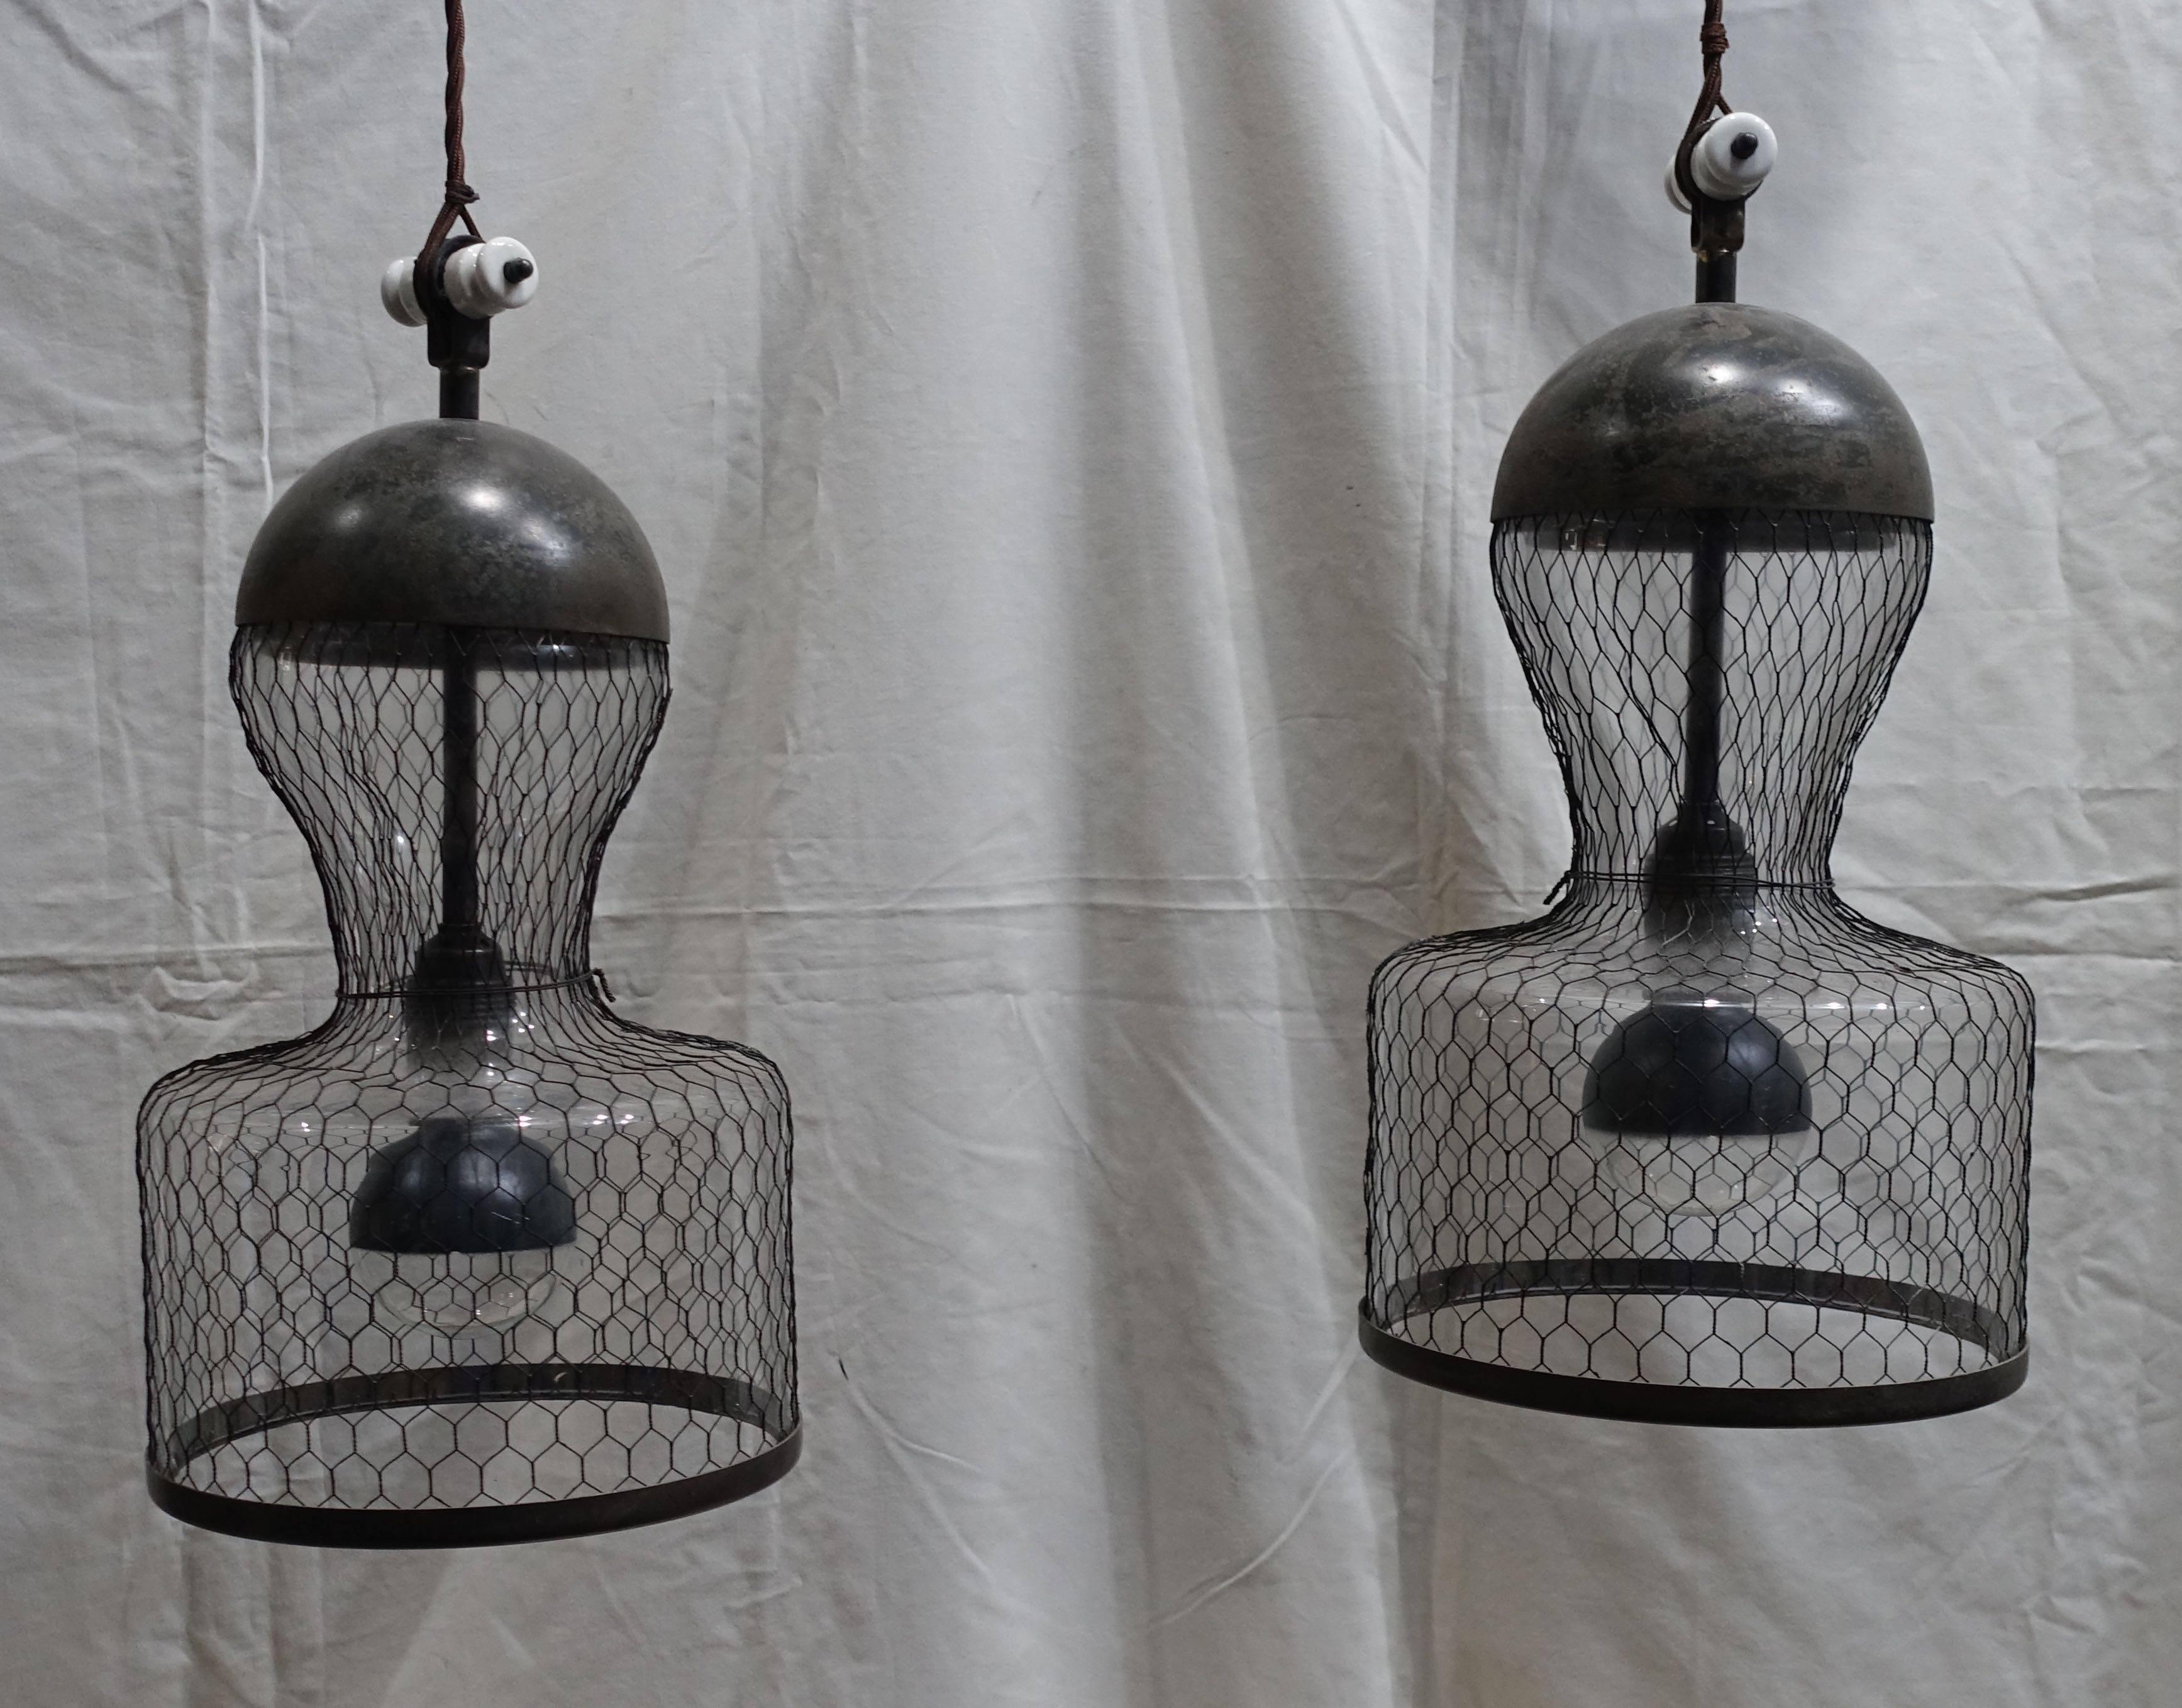 Unusual pair of mesh covered glass Industrial lights from Italy. Note the special design details on the top of the glass fixtures. They are made from vintage parts. The lights are wired for the U.S.